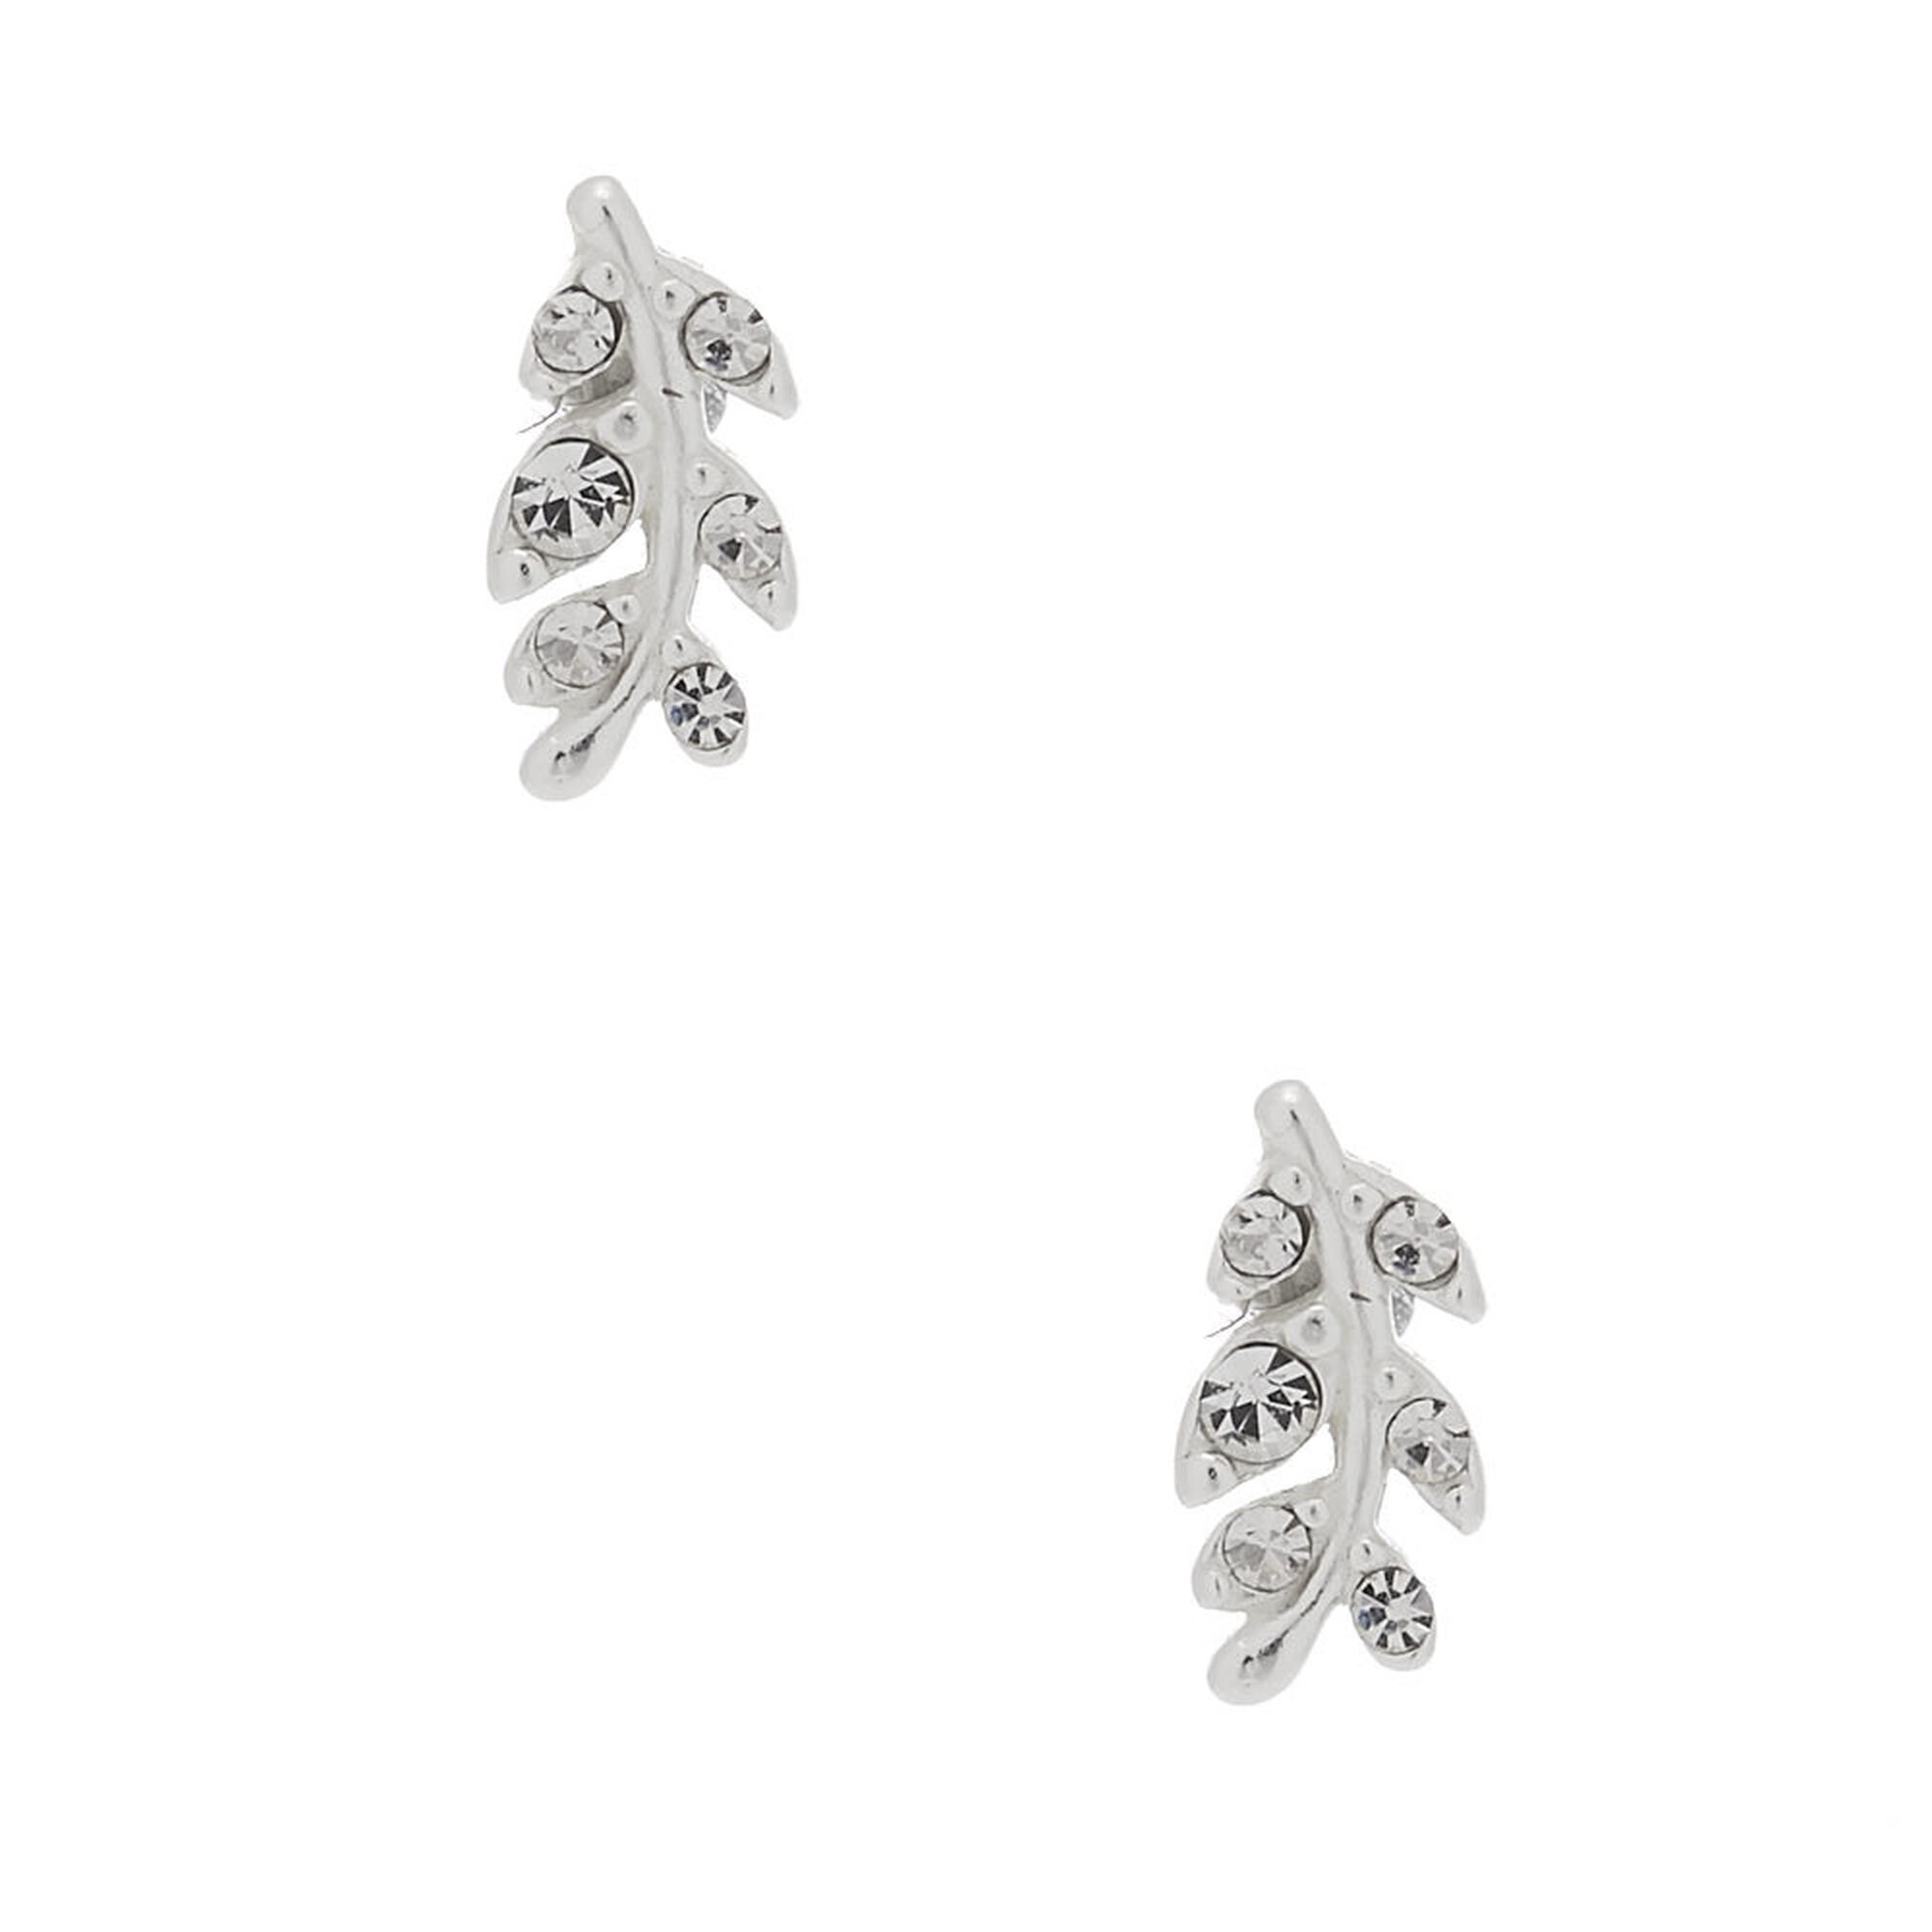 View Claires Leaf Stud Earrings Silver information